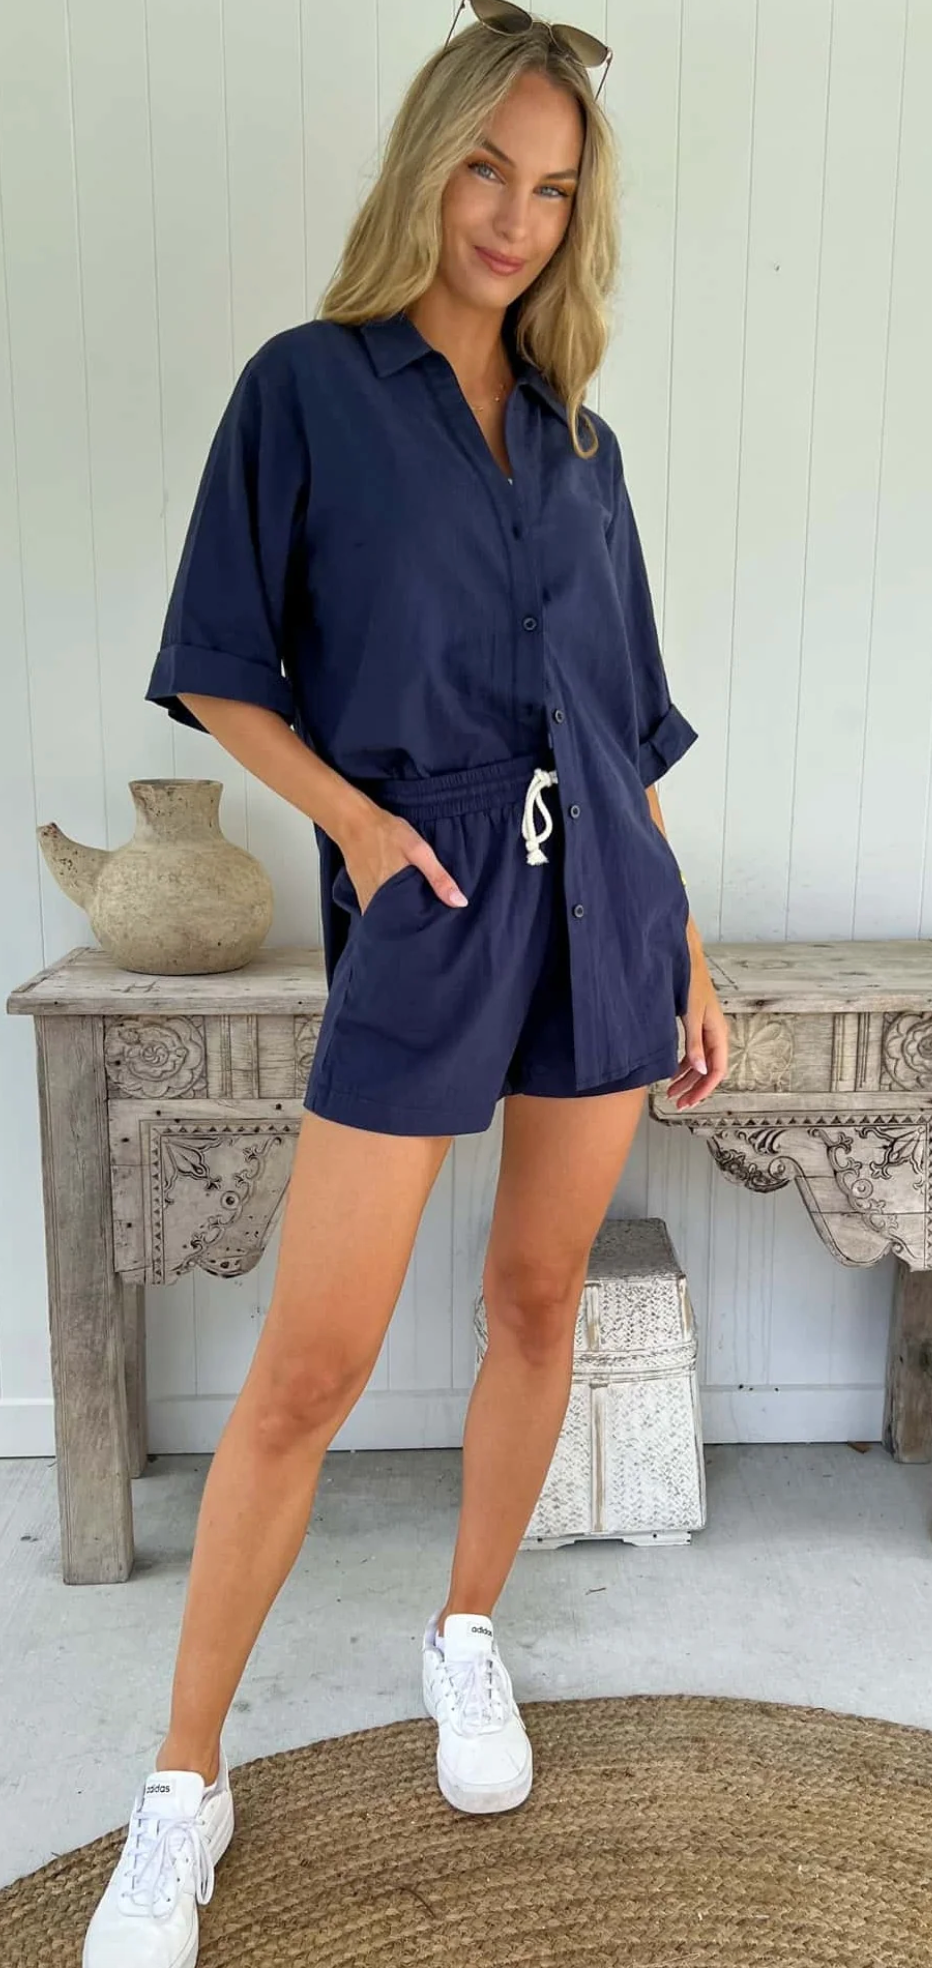 Introducing the Aria Set - Navy! This playful set features a functional top with easy, one size fits all design and functional buttons. The top also boasts a charming tie detail, while the elasticated shorts provide the perfect fit for any body type. Get ready to rock this effortlessly chic look!